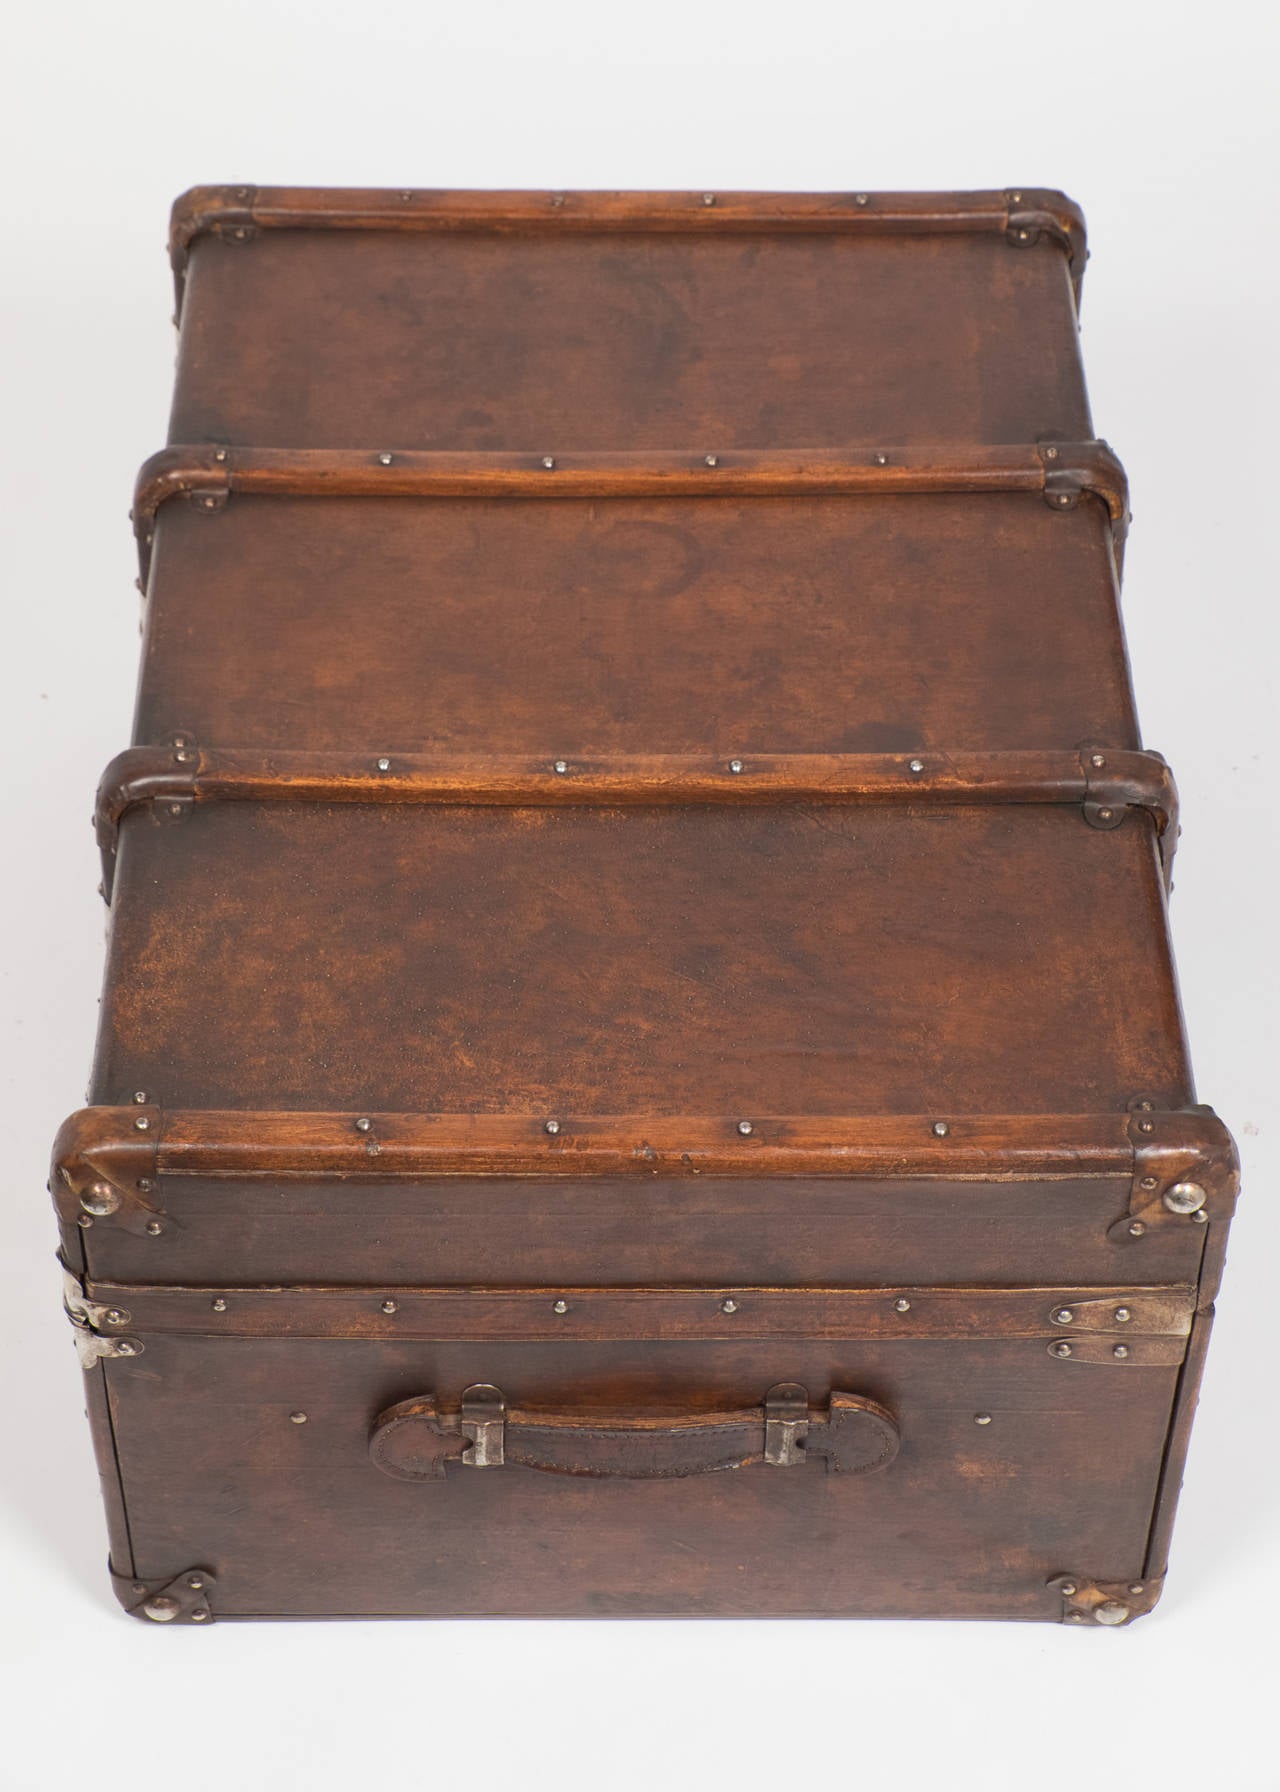 French Vintage Travel Trunk at 1stdibs